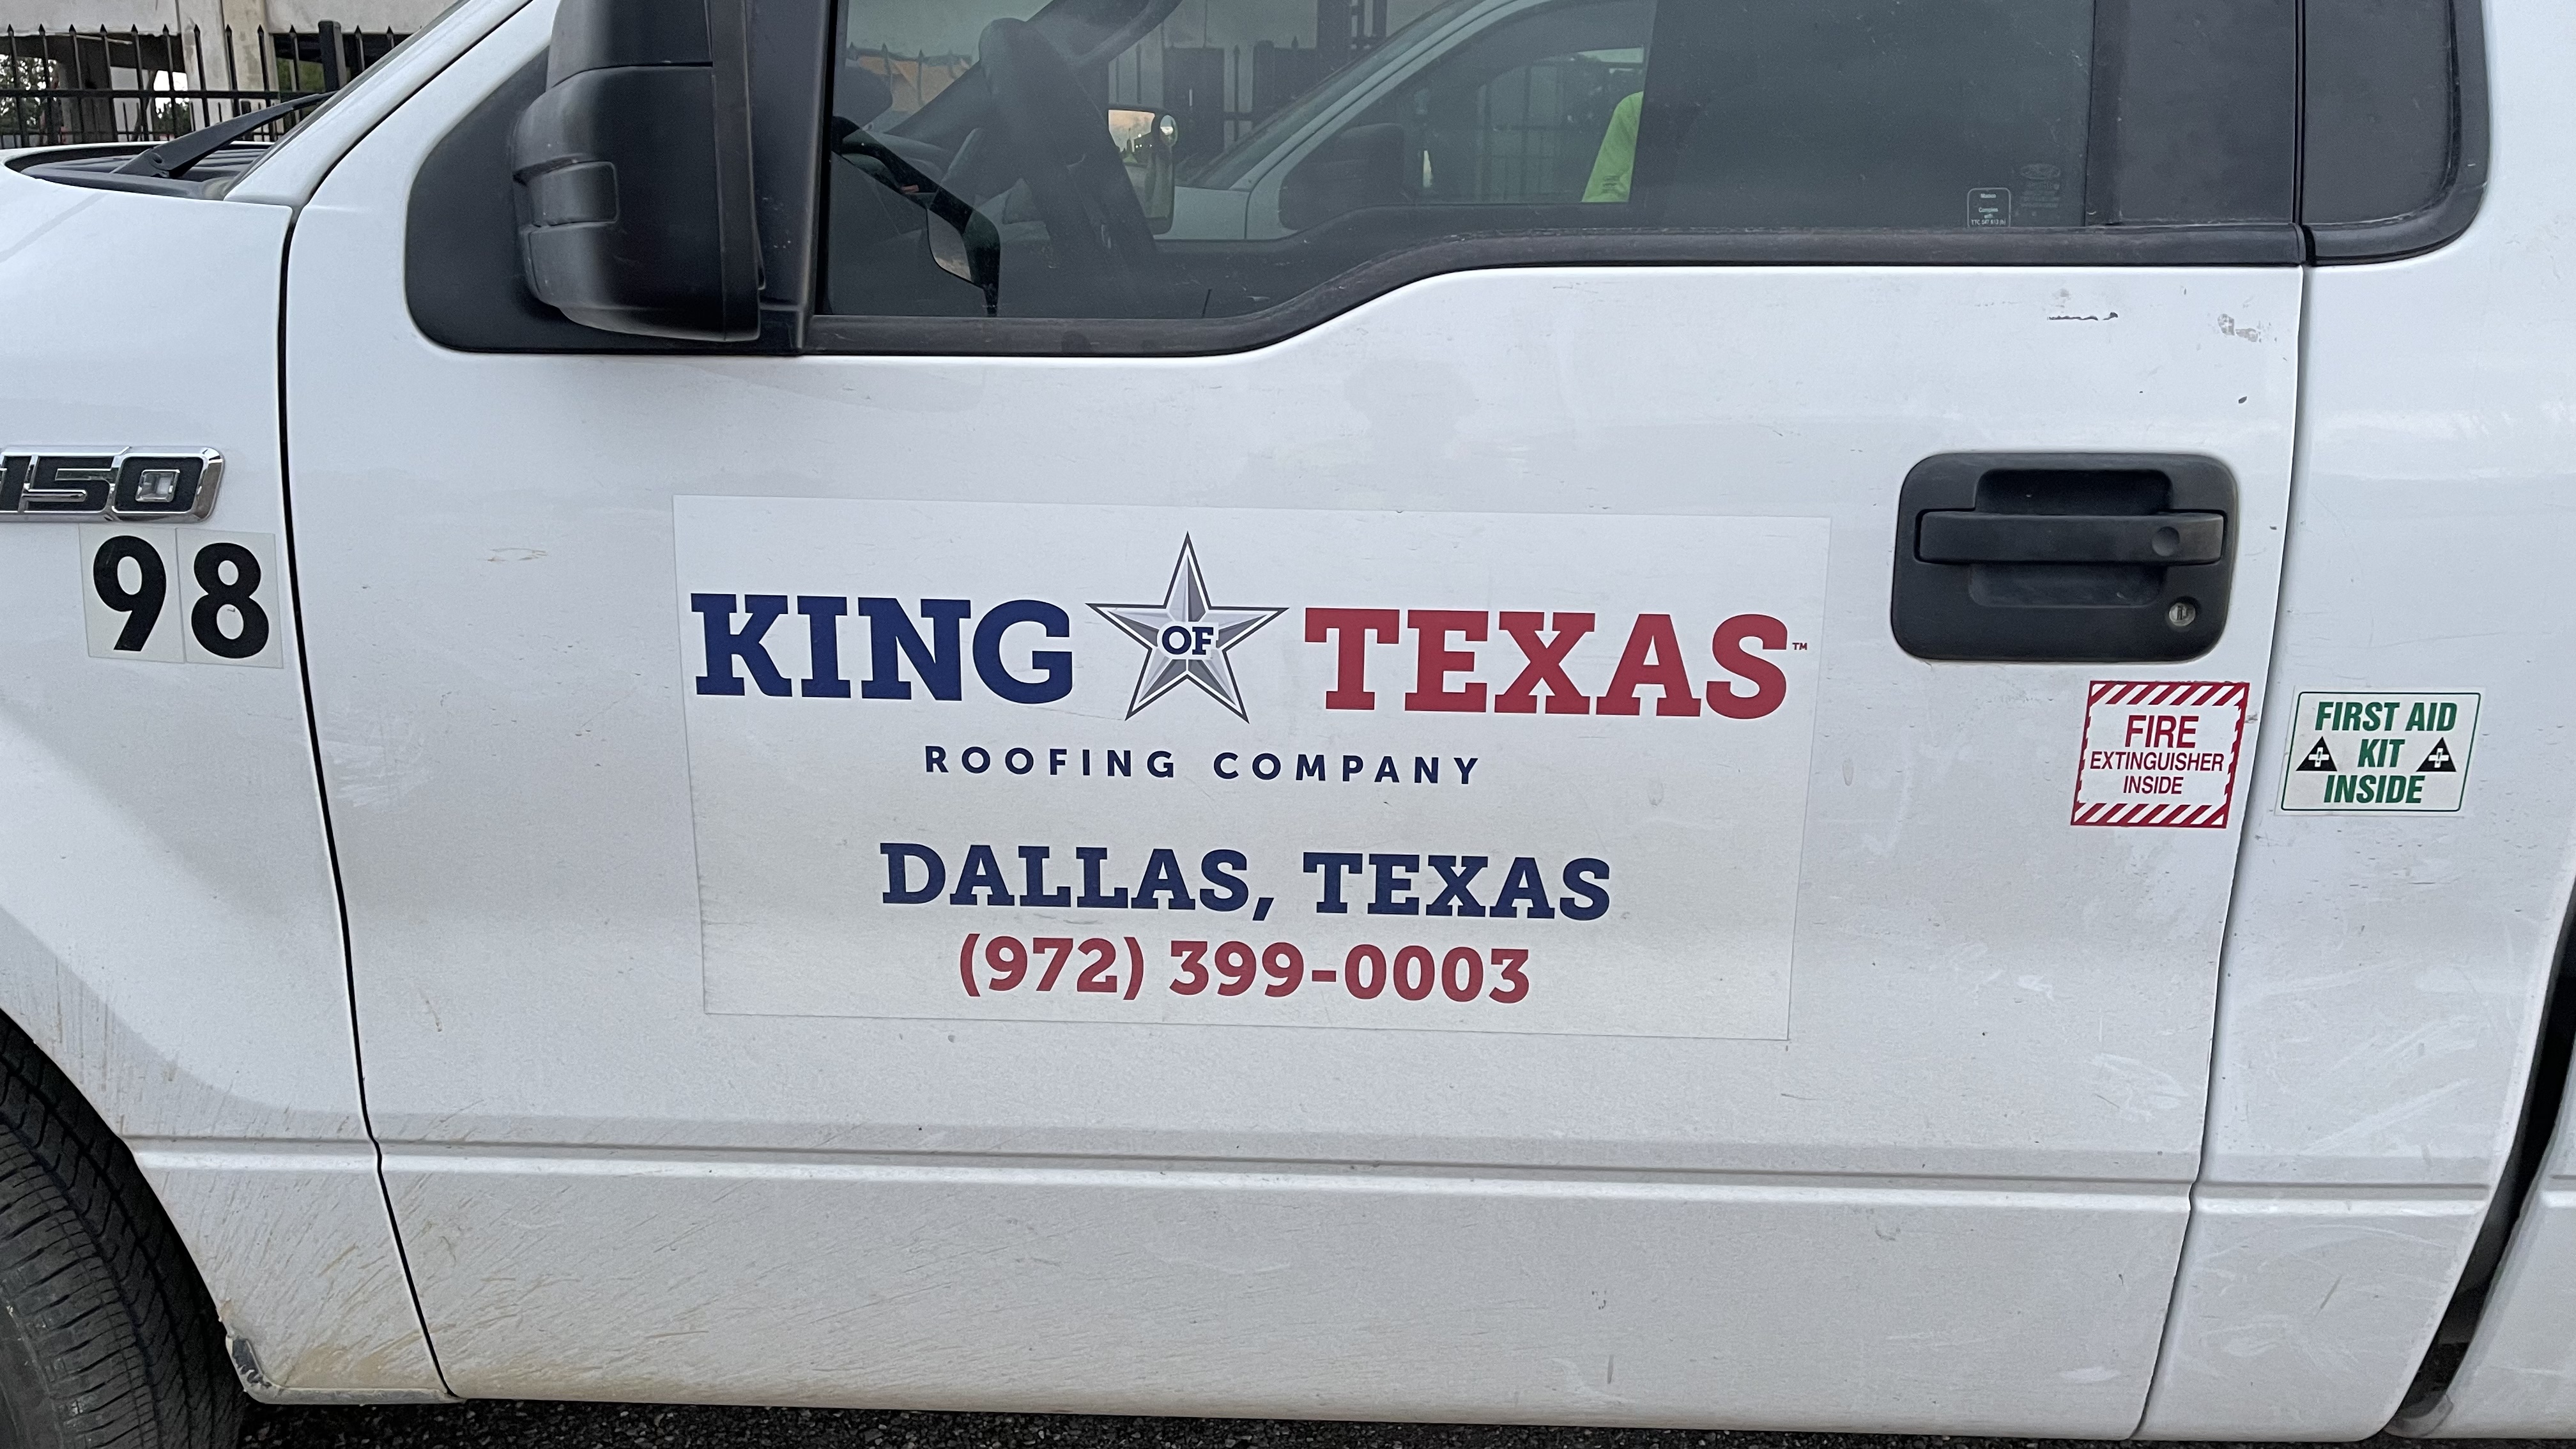 King of Texas Roofing Company Safety Audit